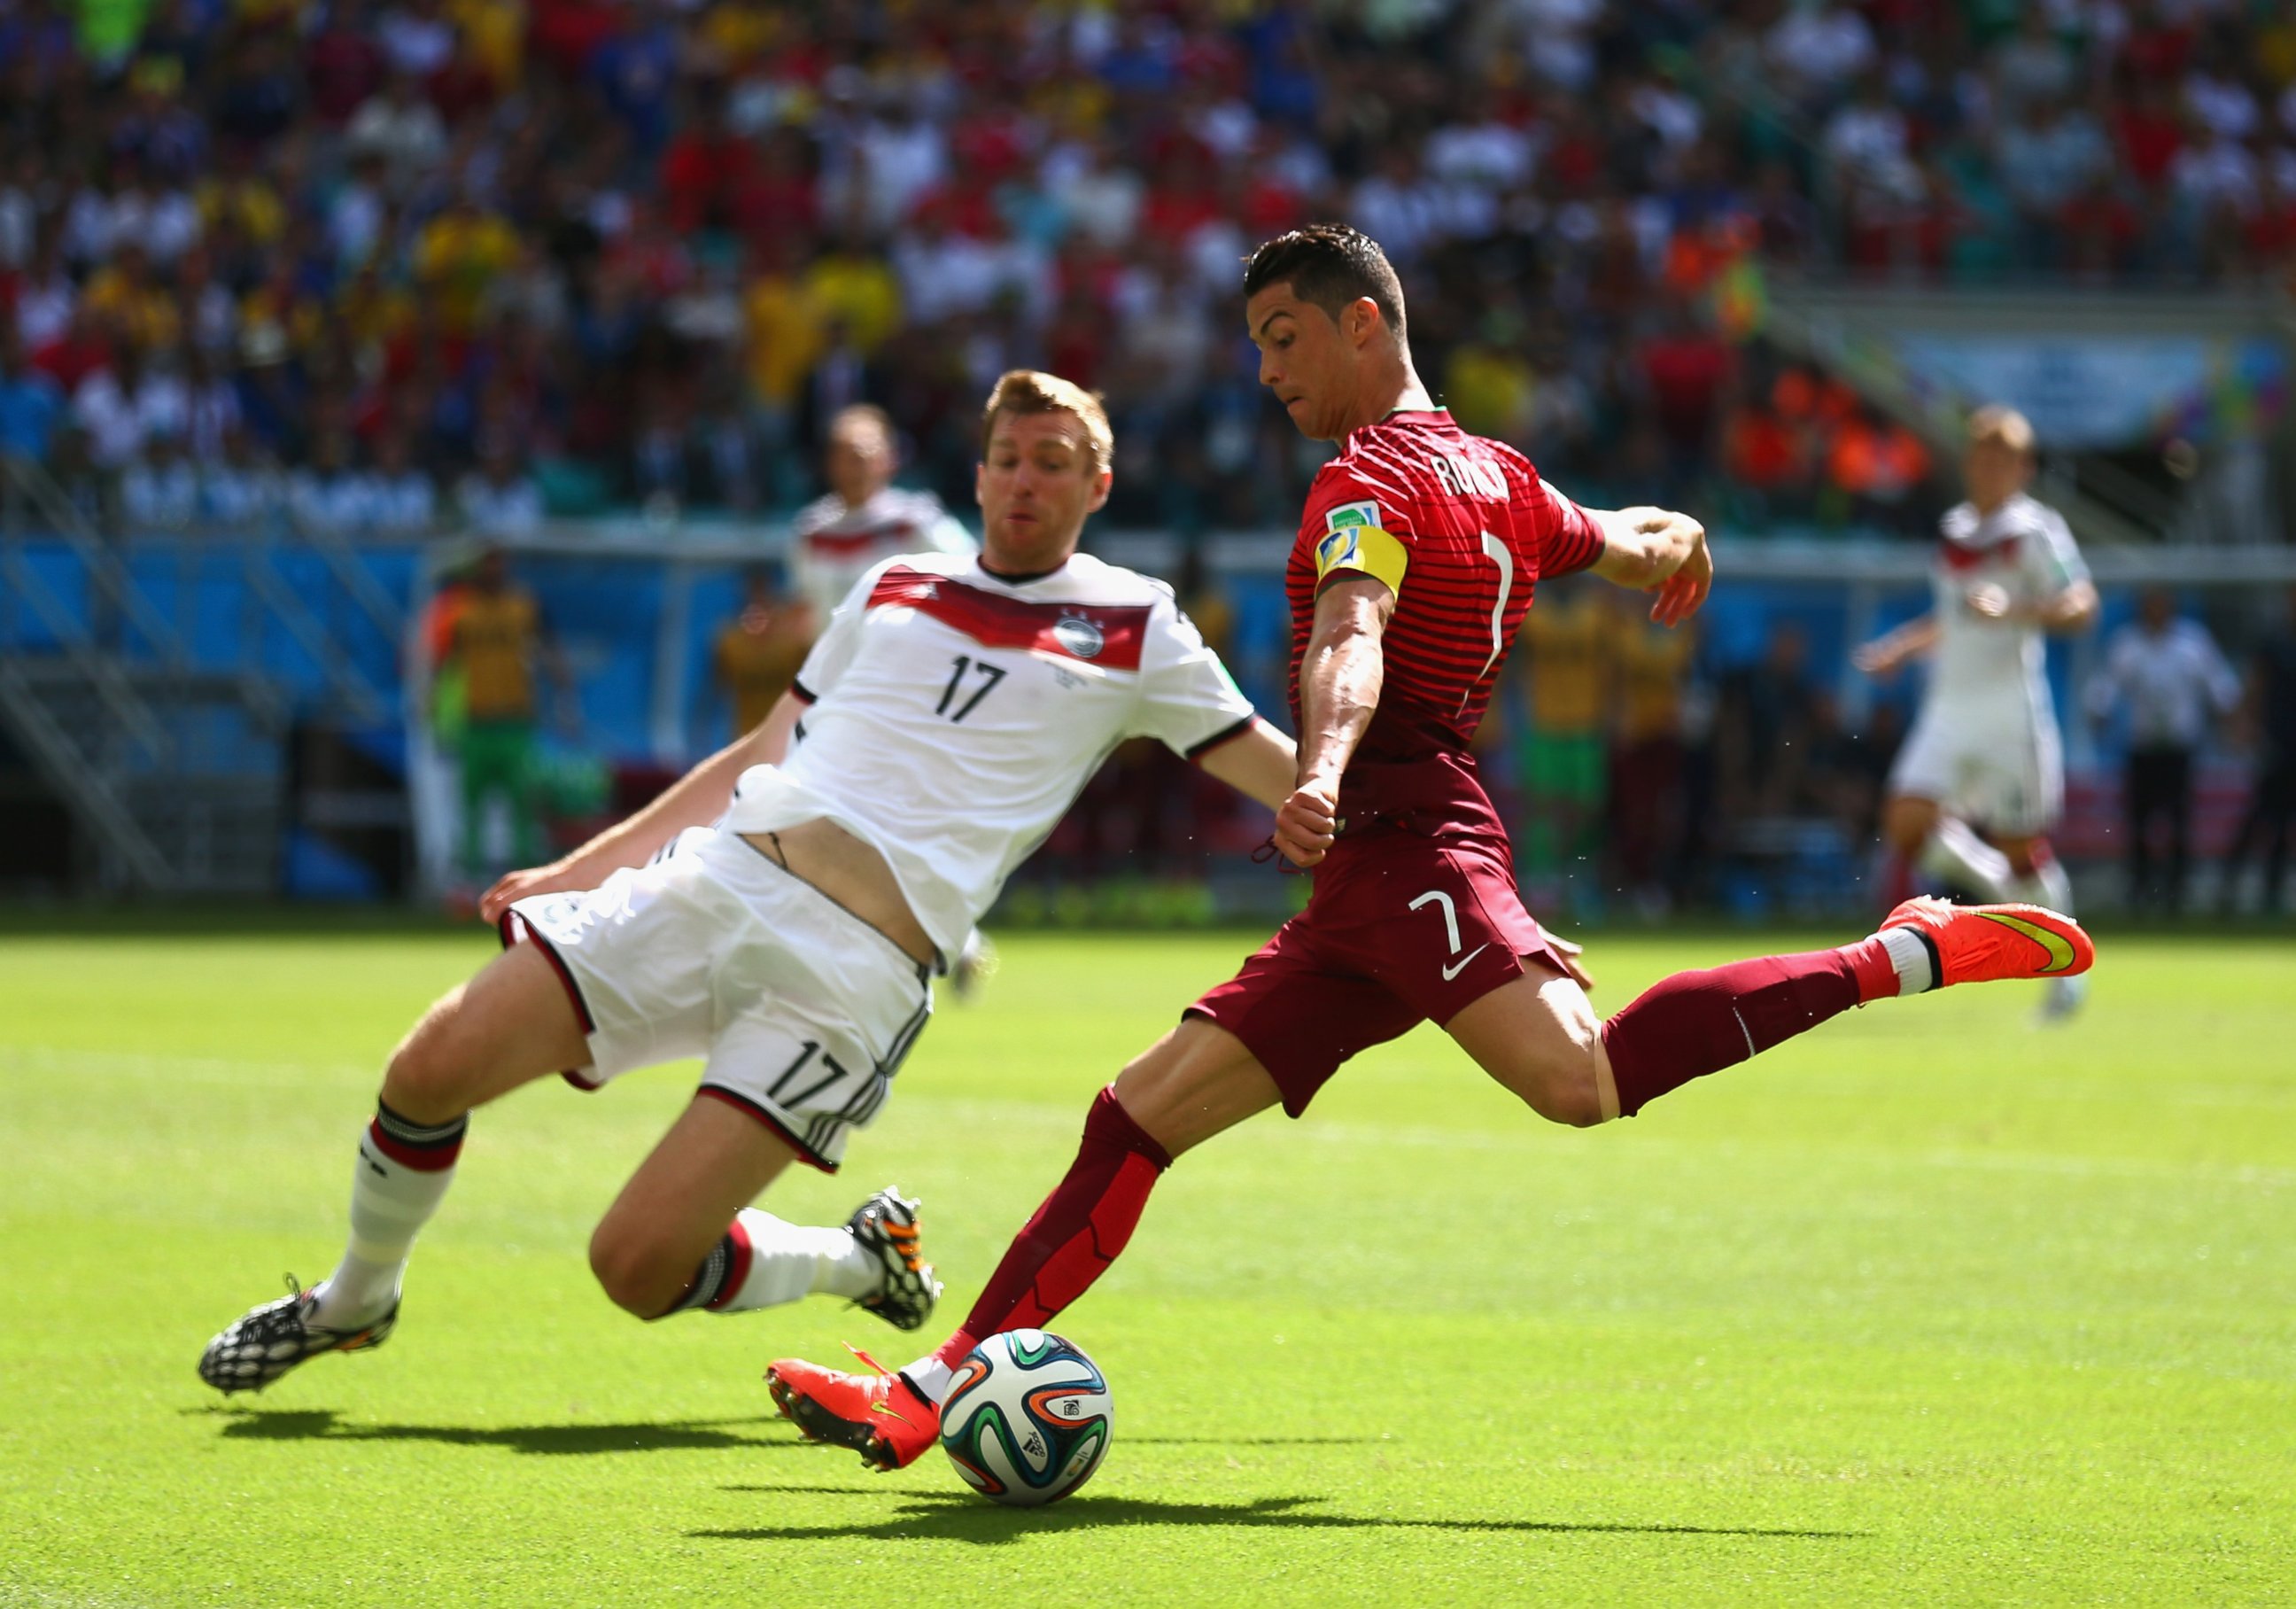 PHOTO: Cristiano Ronaldo of Portugal shoots against Per Mertesacker of Germany during the 2014 FIFA World Cup Brazil Group G match between Germany and Portugal at Arena Fonte Nova on June 16, 2014 in Salvador, Brazil. 